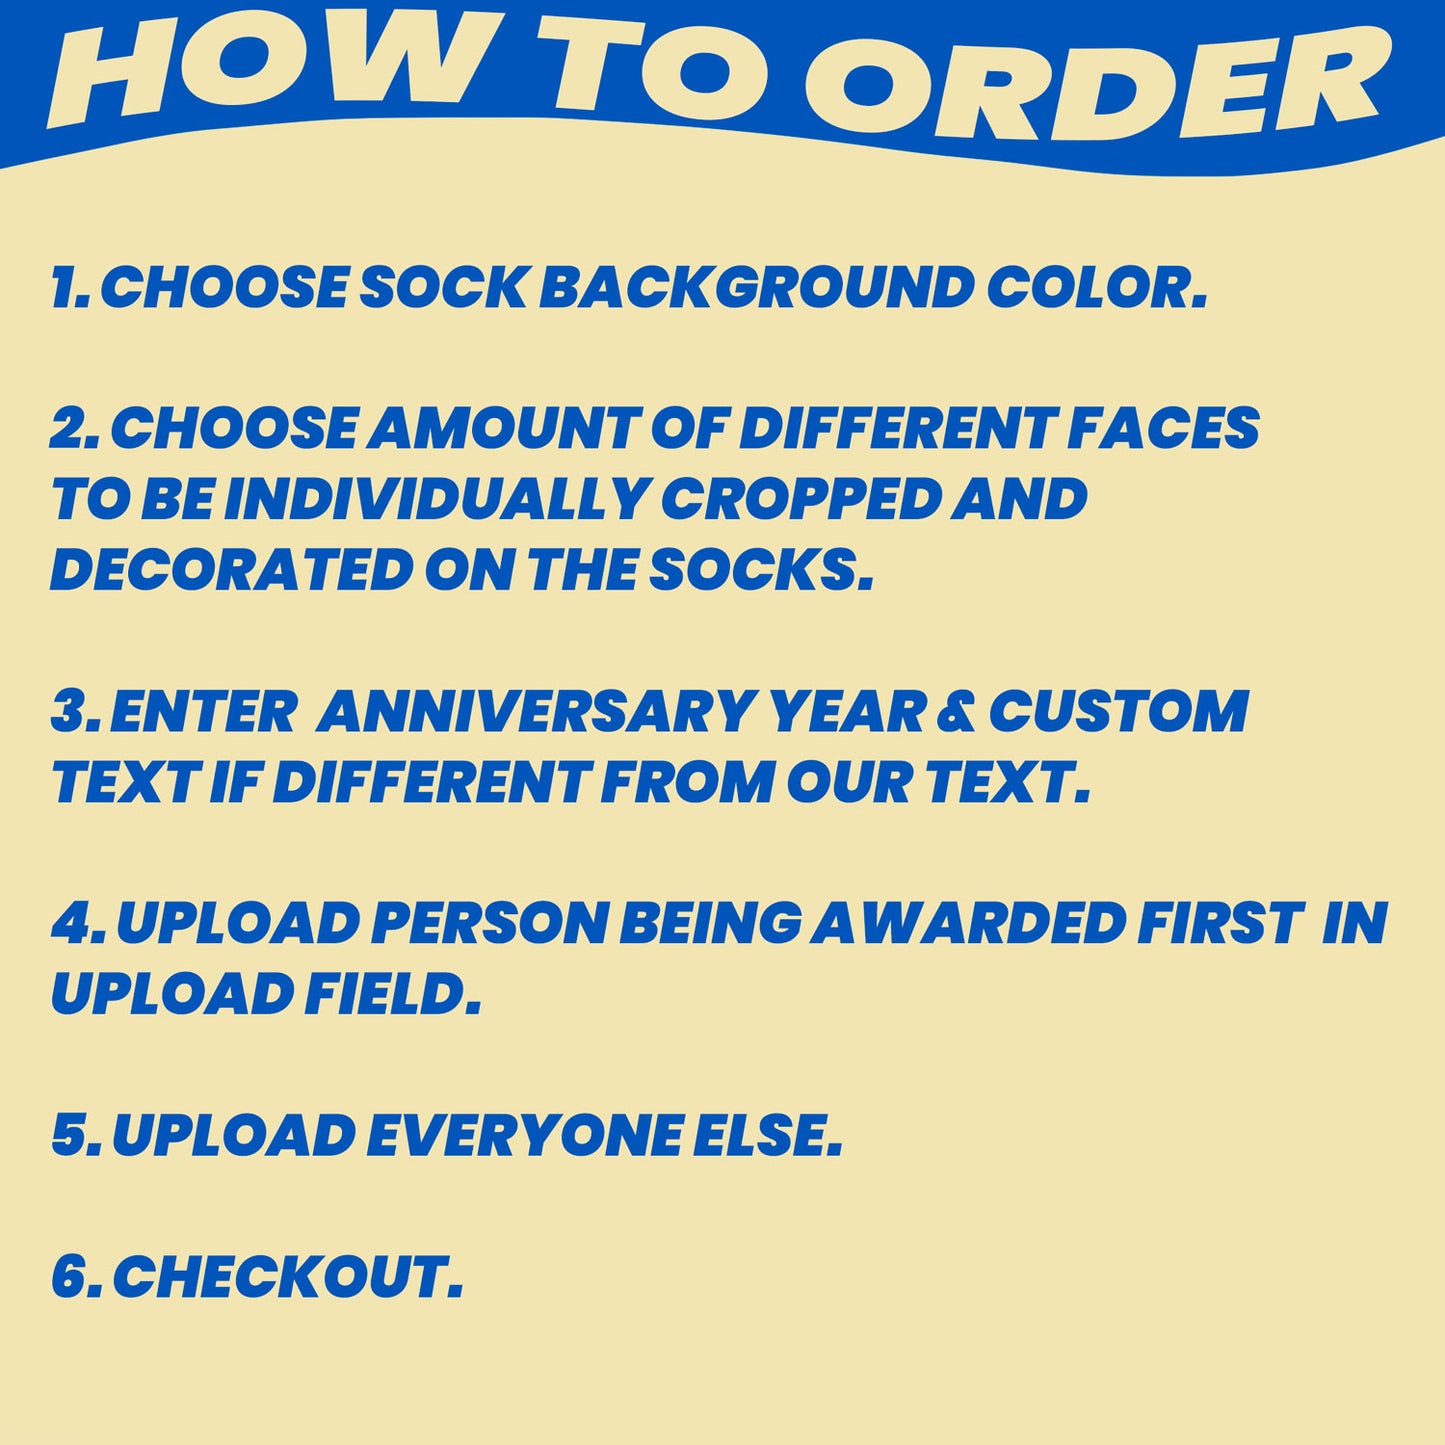 employee anniversary personalized socks with coworkers faces instructions on how to order